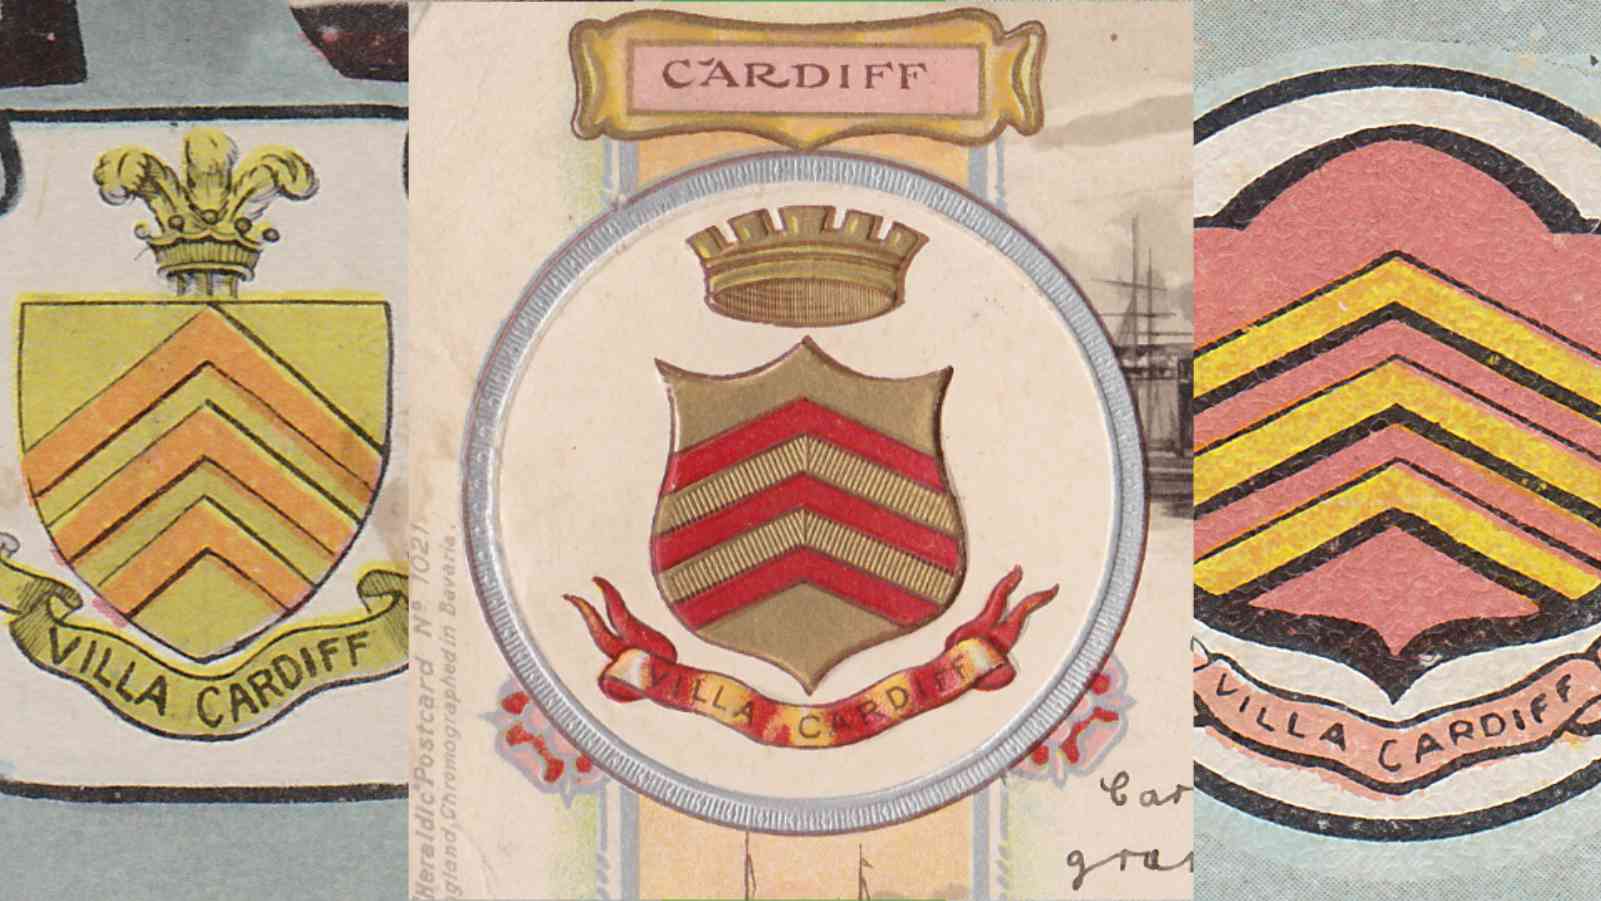 Collection of Cardiff coat of arms